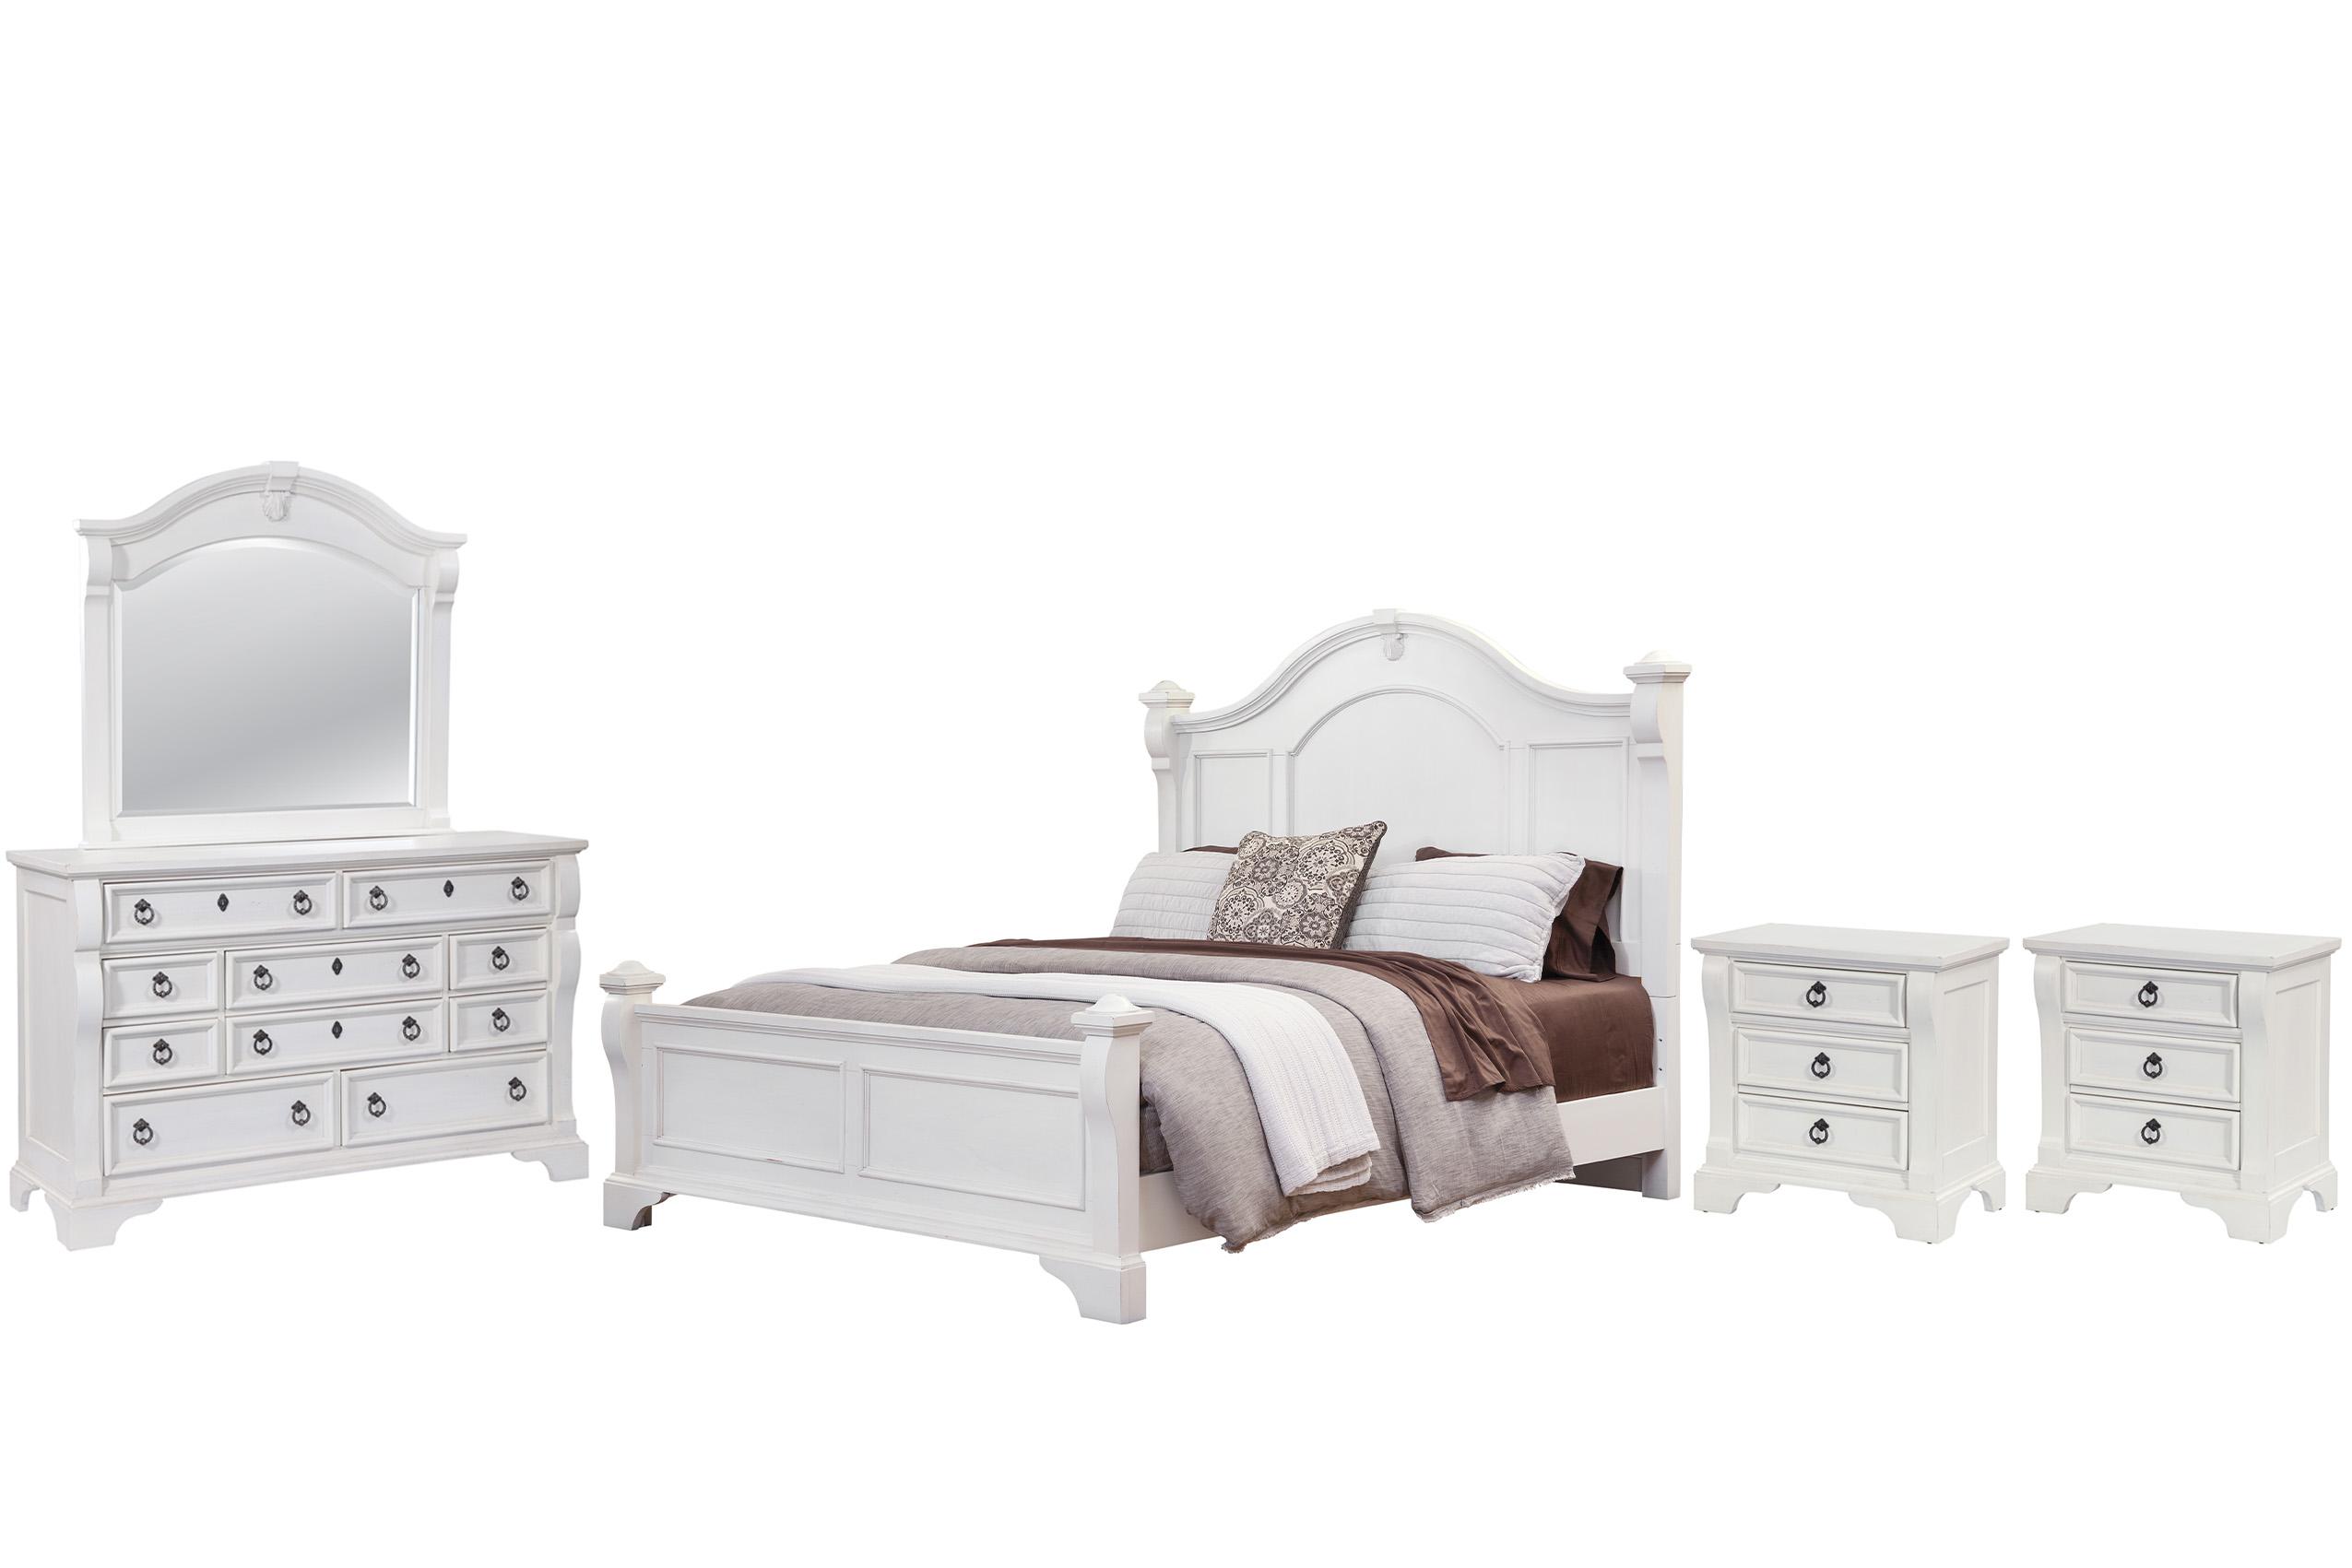 Classic, Traditional, Cottage Poster Bedroom Set HEIRLOOM 2910-66POS 2910-66POS-2NDM-5PC in White 